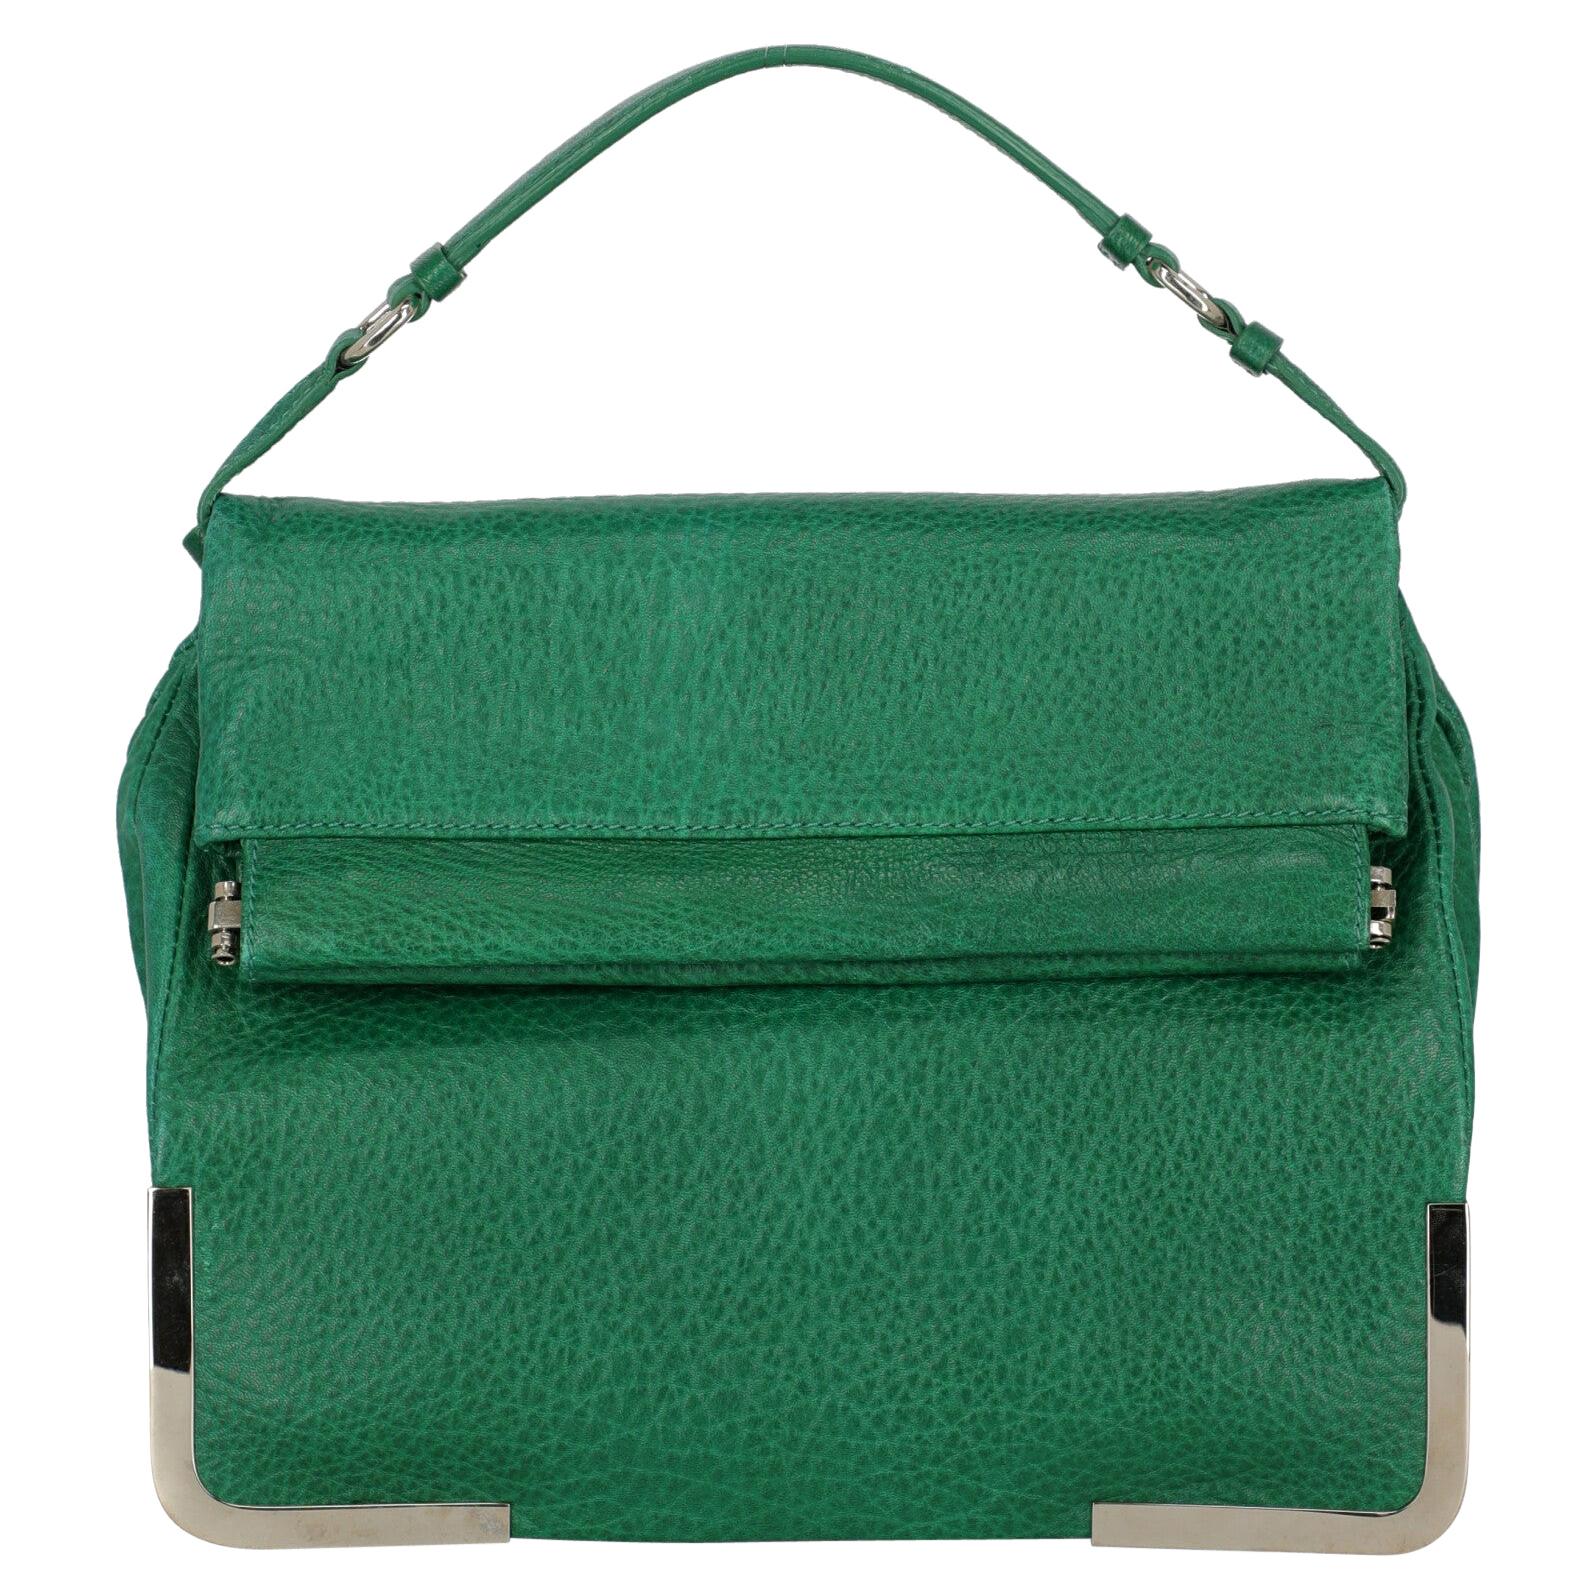 Ports 1961 Women  Handbags Green Leather For Sale